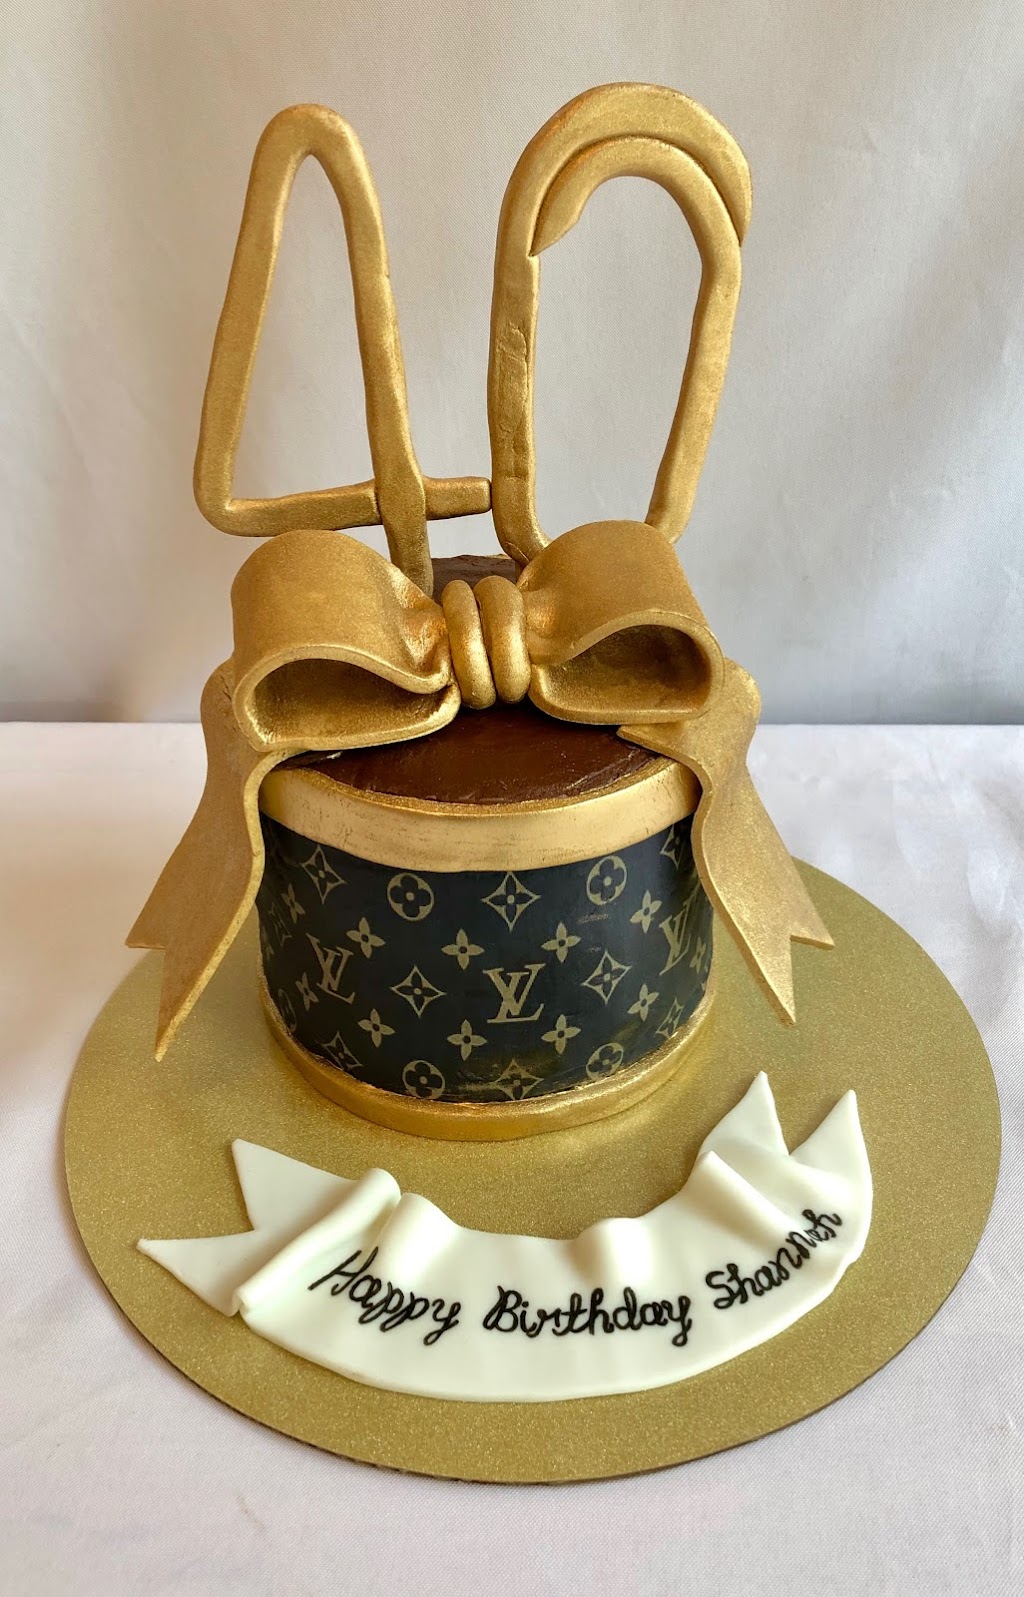 Cakes by Chantelle | 13 Cottler Ave, Springfield, NJ 07081 | Phone: (646) 255-2279